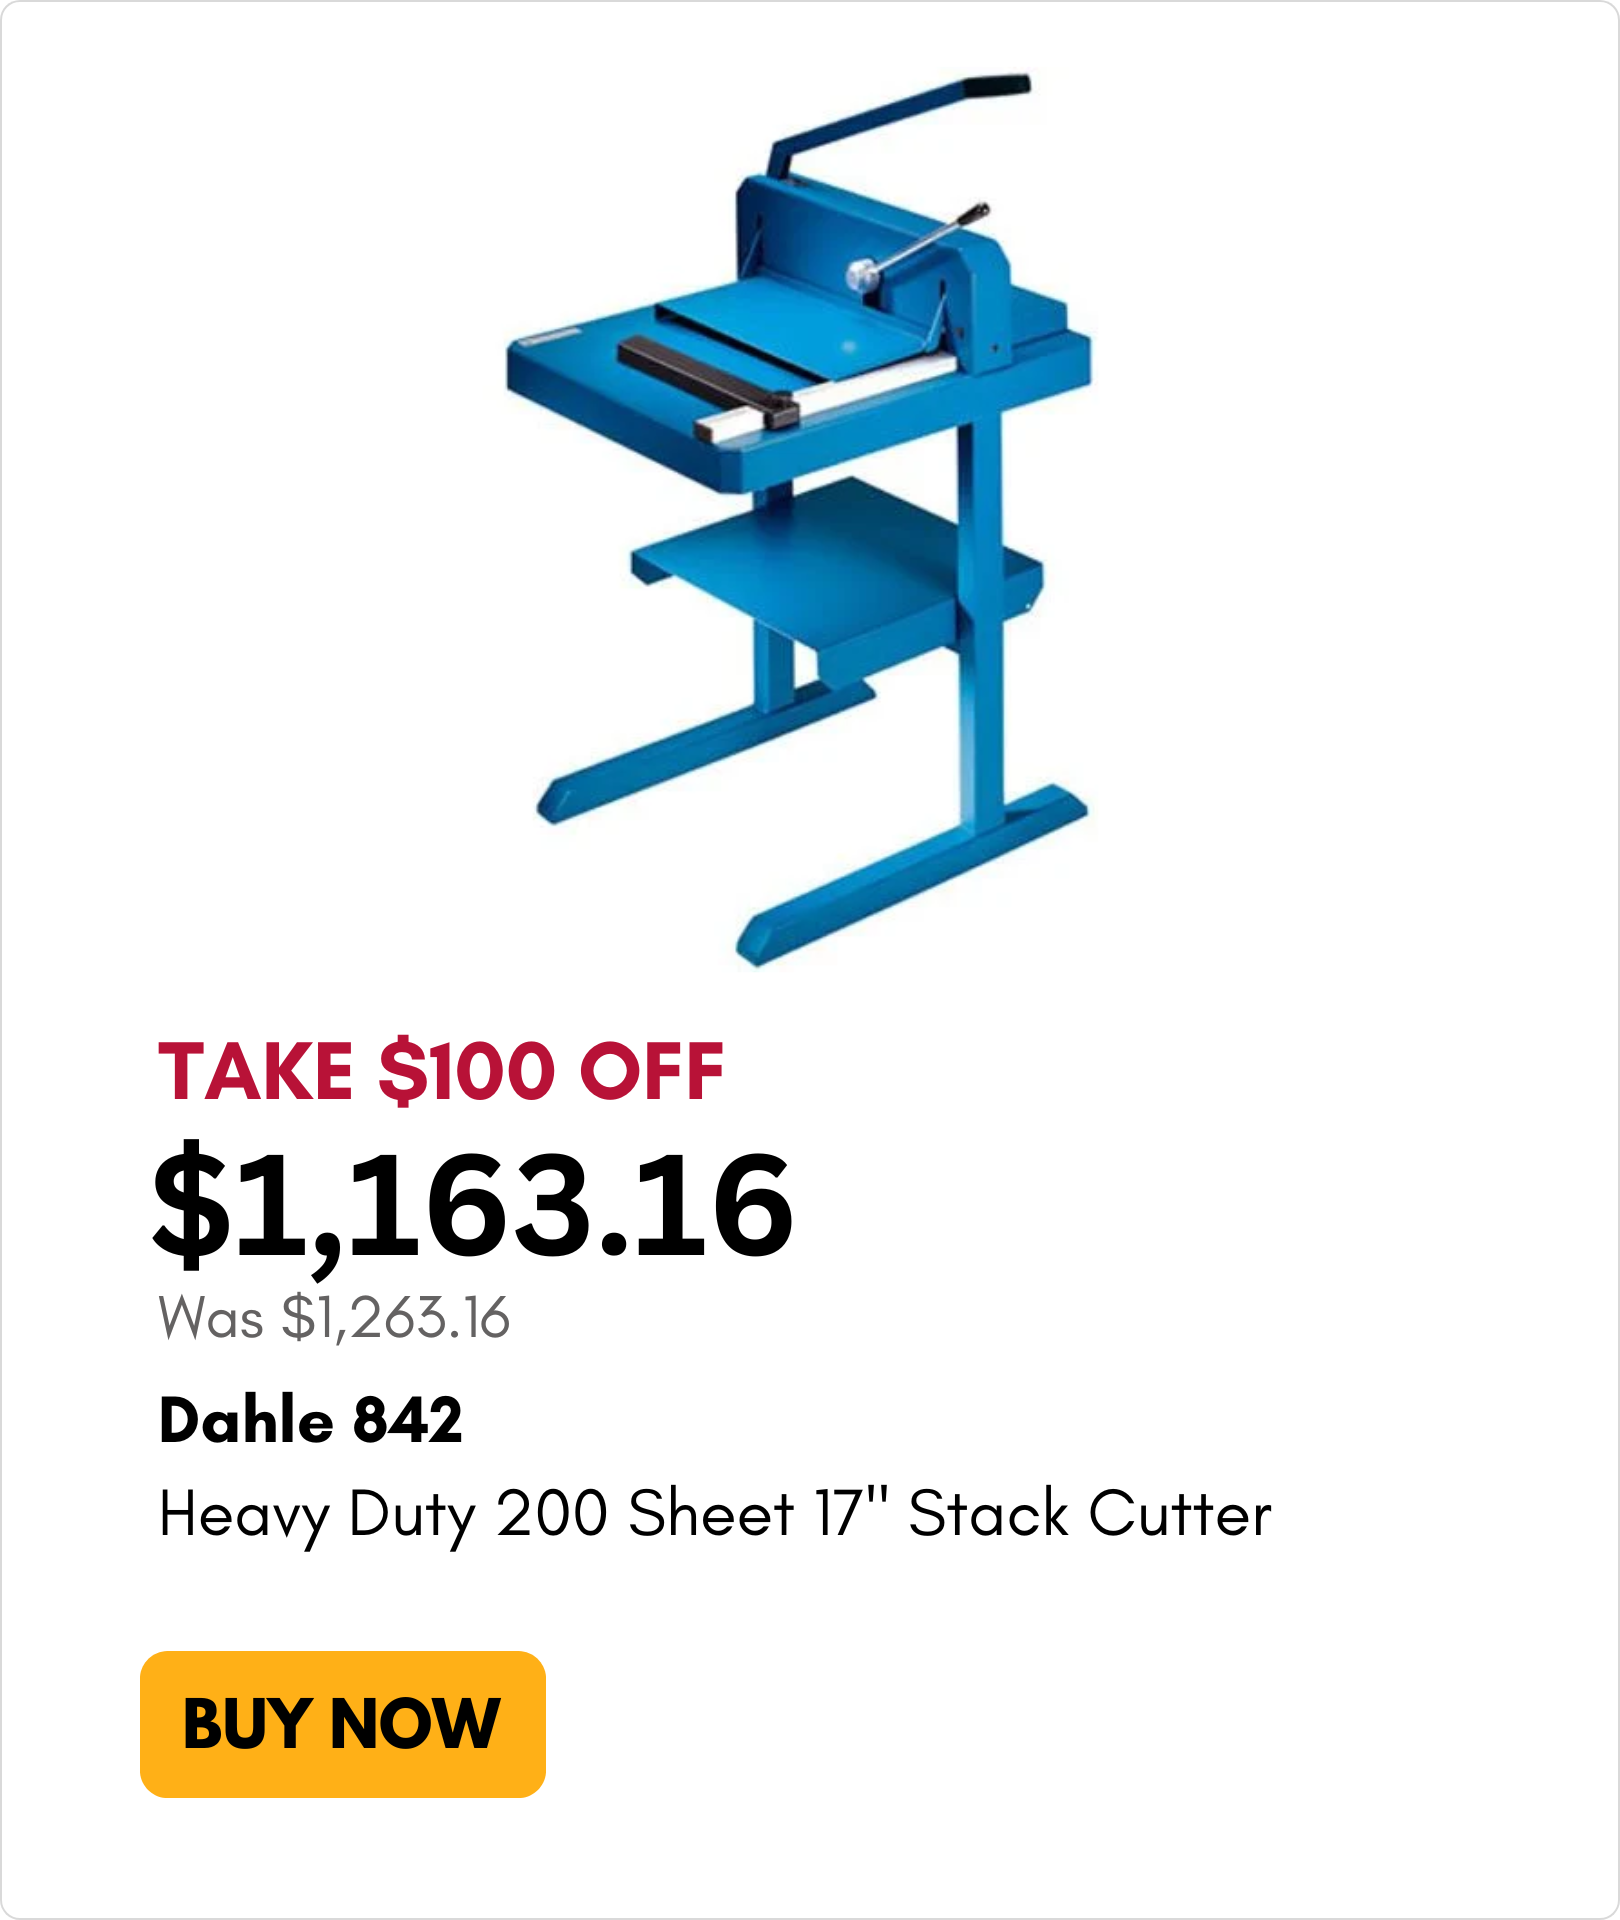 Dahle 842 Heavy Duty 200 Sheet 17-Inch Stack Cutter on sale for $100 off on MyBinding.com